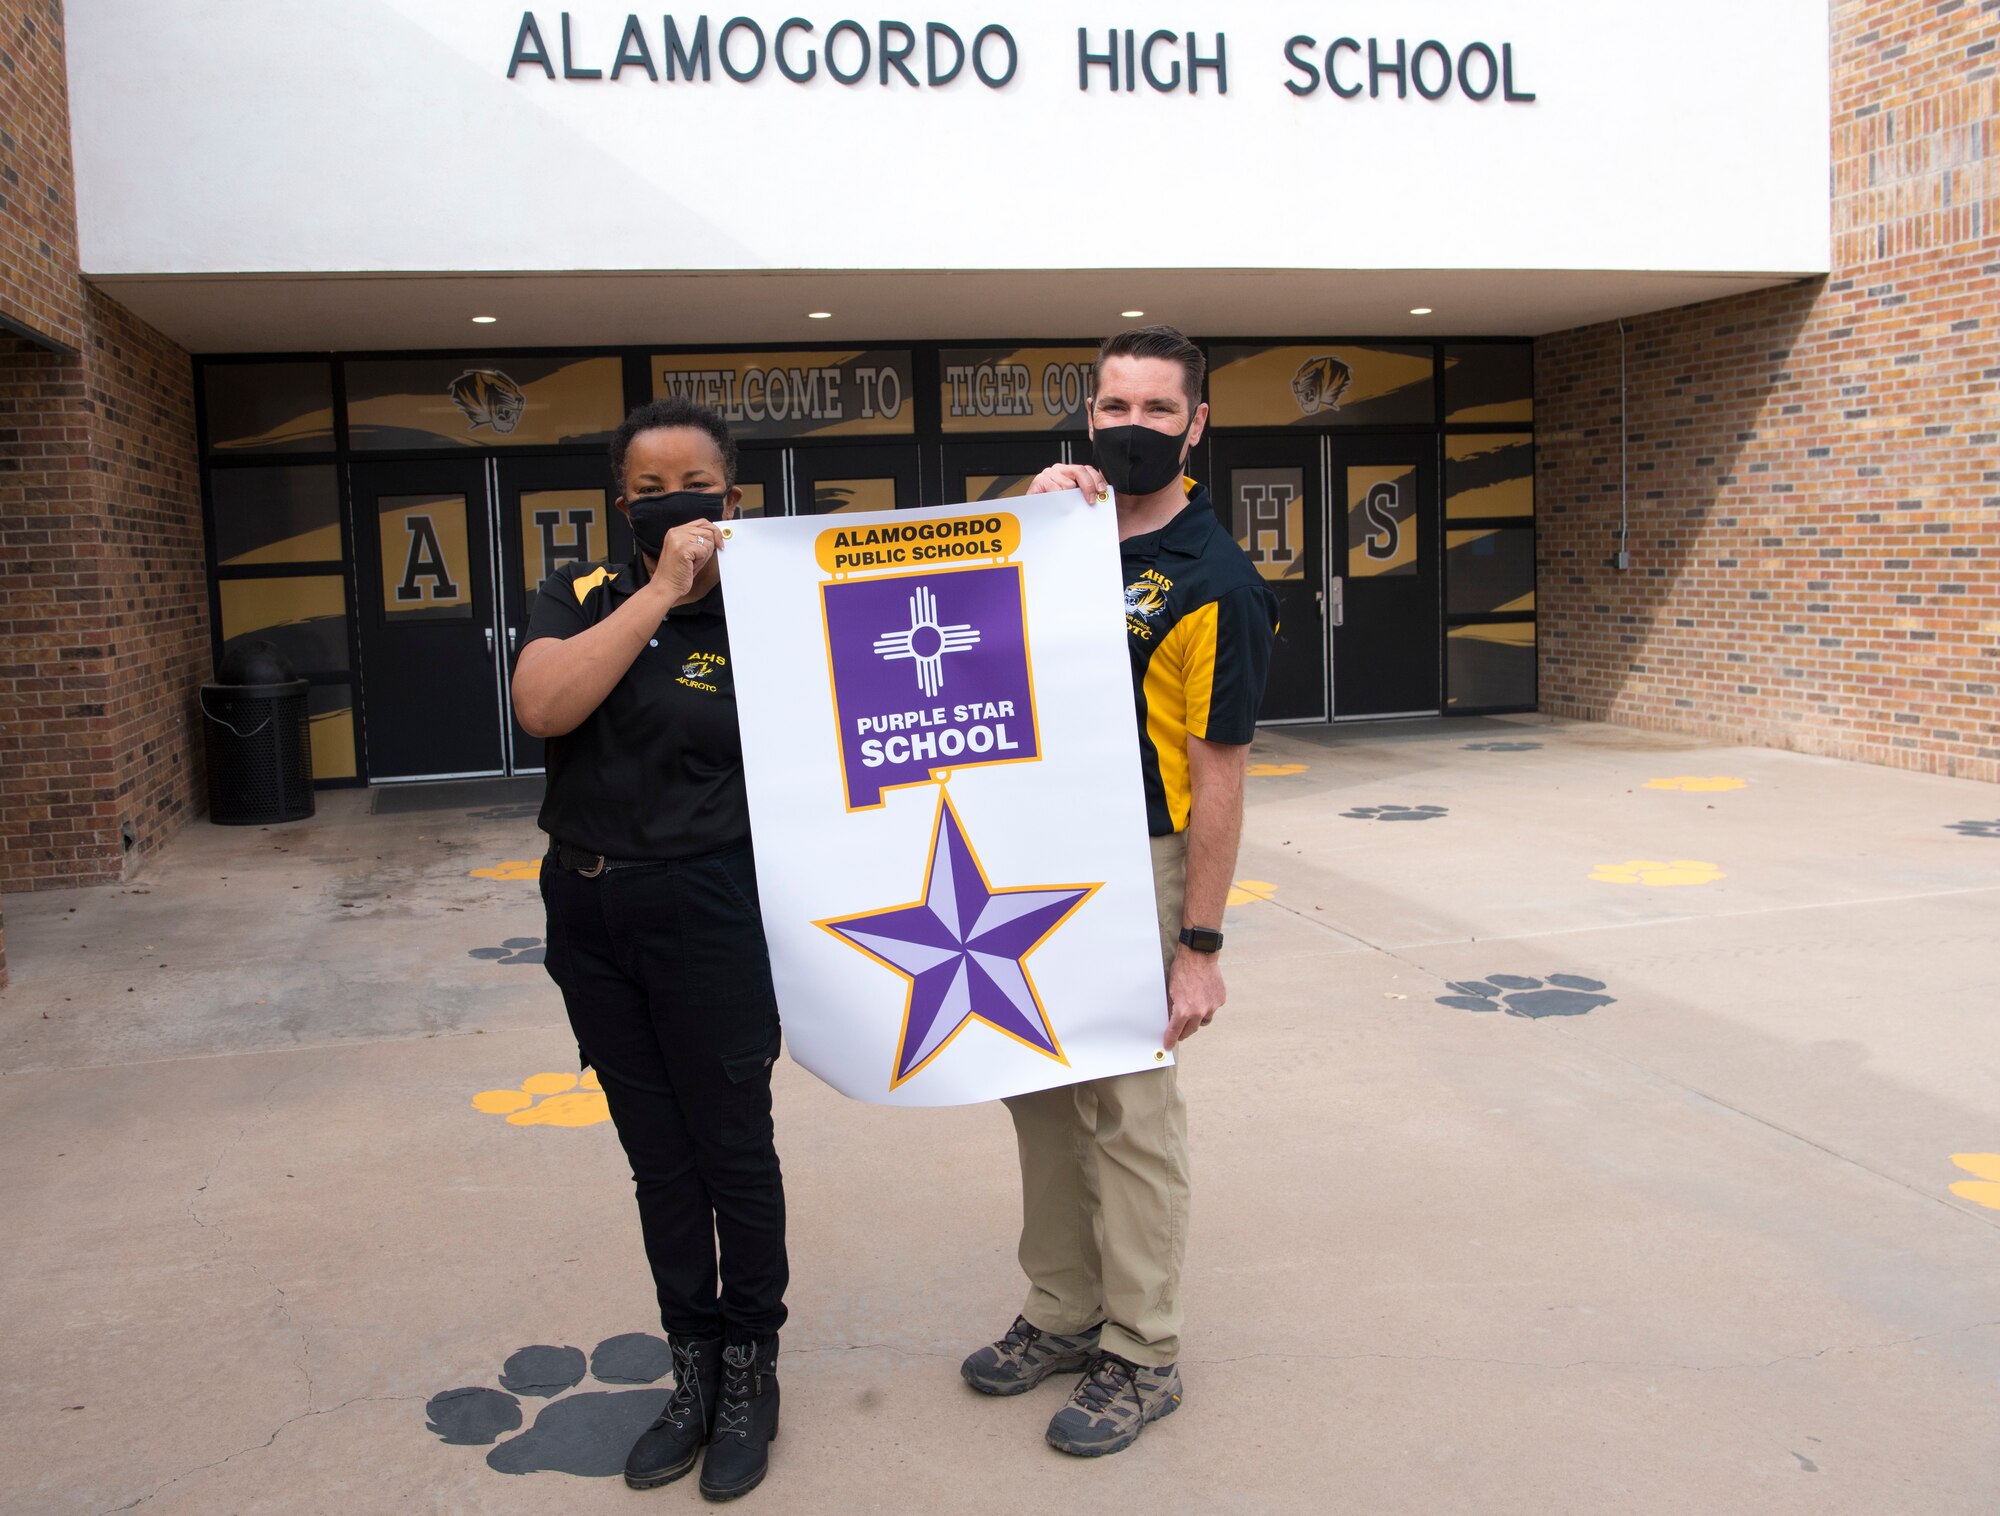 Master Sgt. Hope Sanders, and Maj. Tom Odgers, Alamogordo High School JROTC leaders, pose with Purple Star School poster for a photo, Jan. 19, 2021 at Alamogordo, New Mexico. The Junior Reserve Officers’ Training Corps is a federal program sponsored by the United States Armed Forces in high schools across the United States and United States military bases. (U.S. Air Force photo by Airman 1st Class Jessica Sanchez)